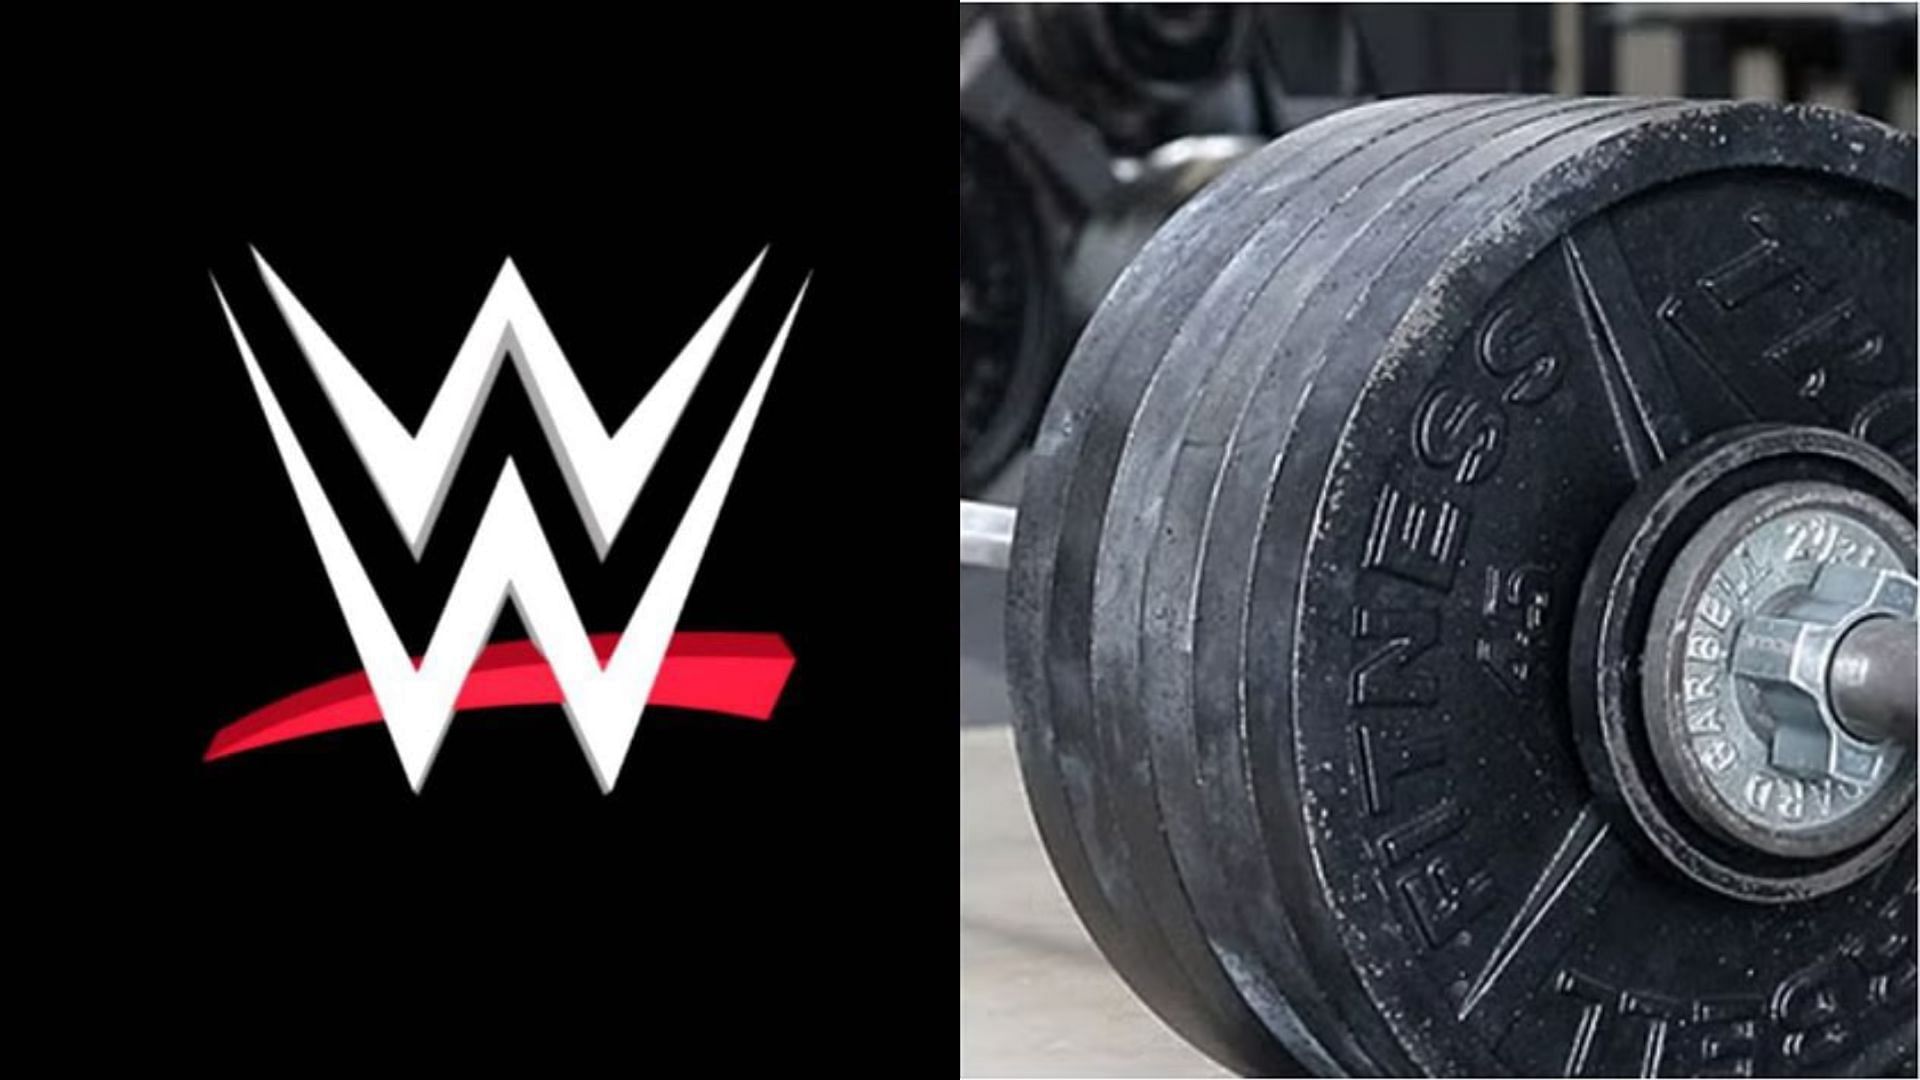 Find out which former WWE Superstar share their workout video?